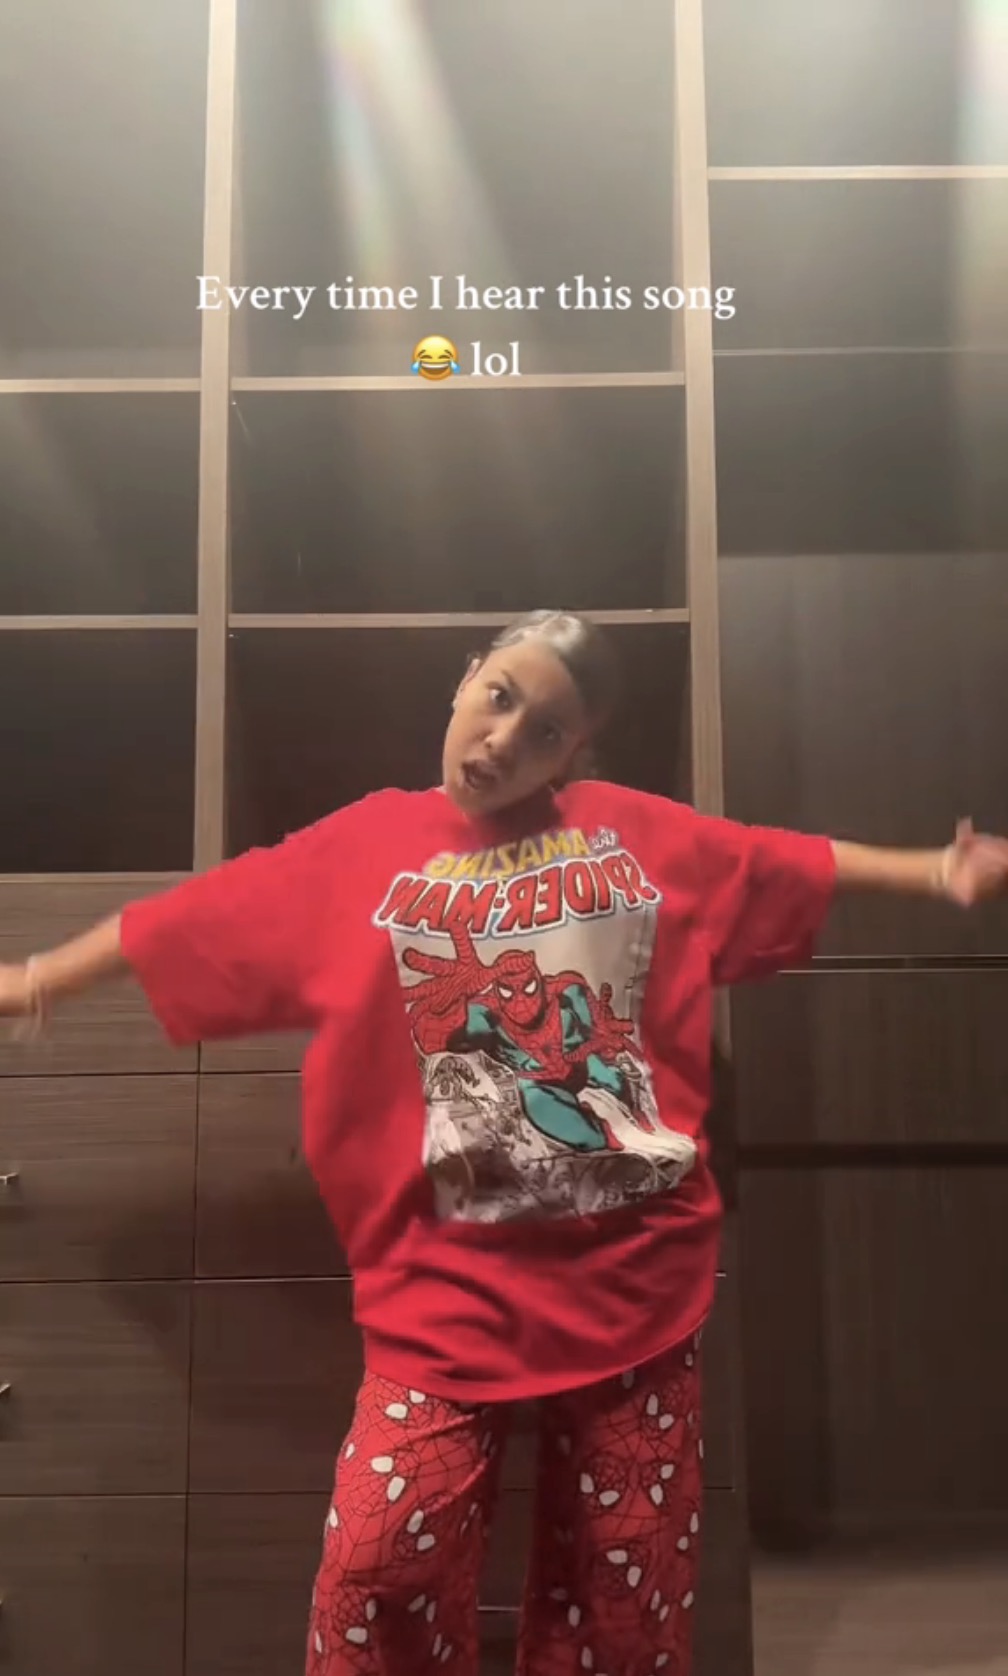 The pre-teen wore Spider-Man pajamas for her sleepover at Lala Anthony's house, and danced to her new song